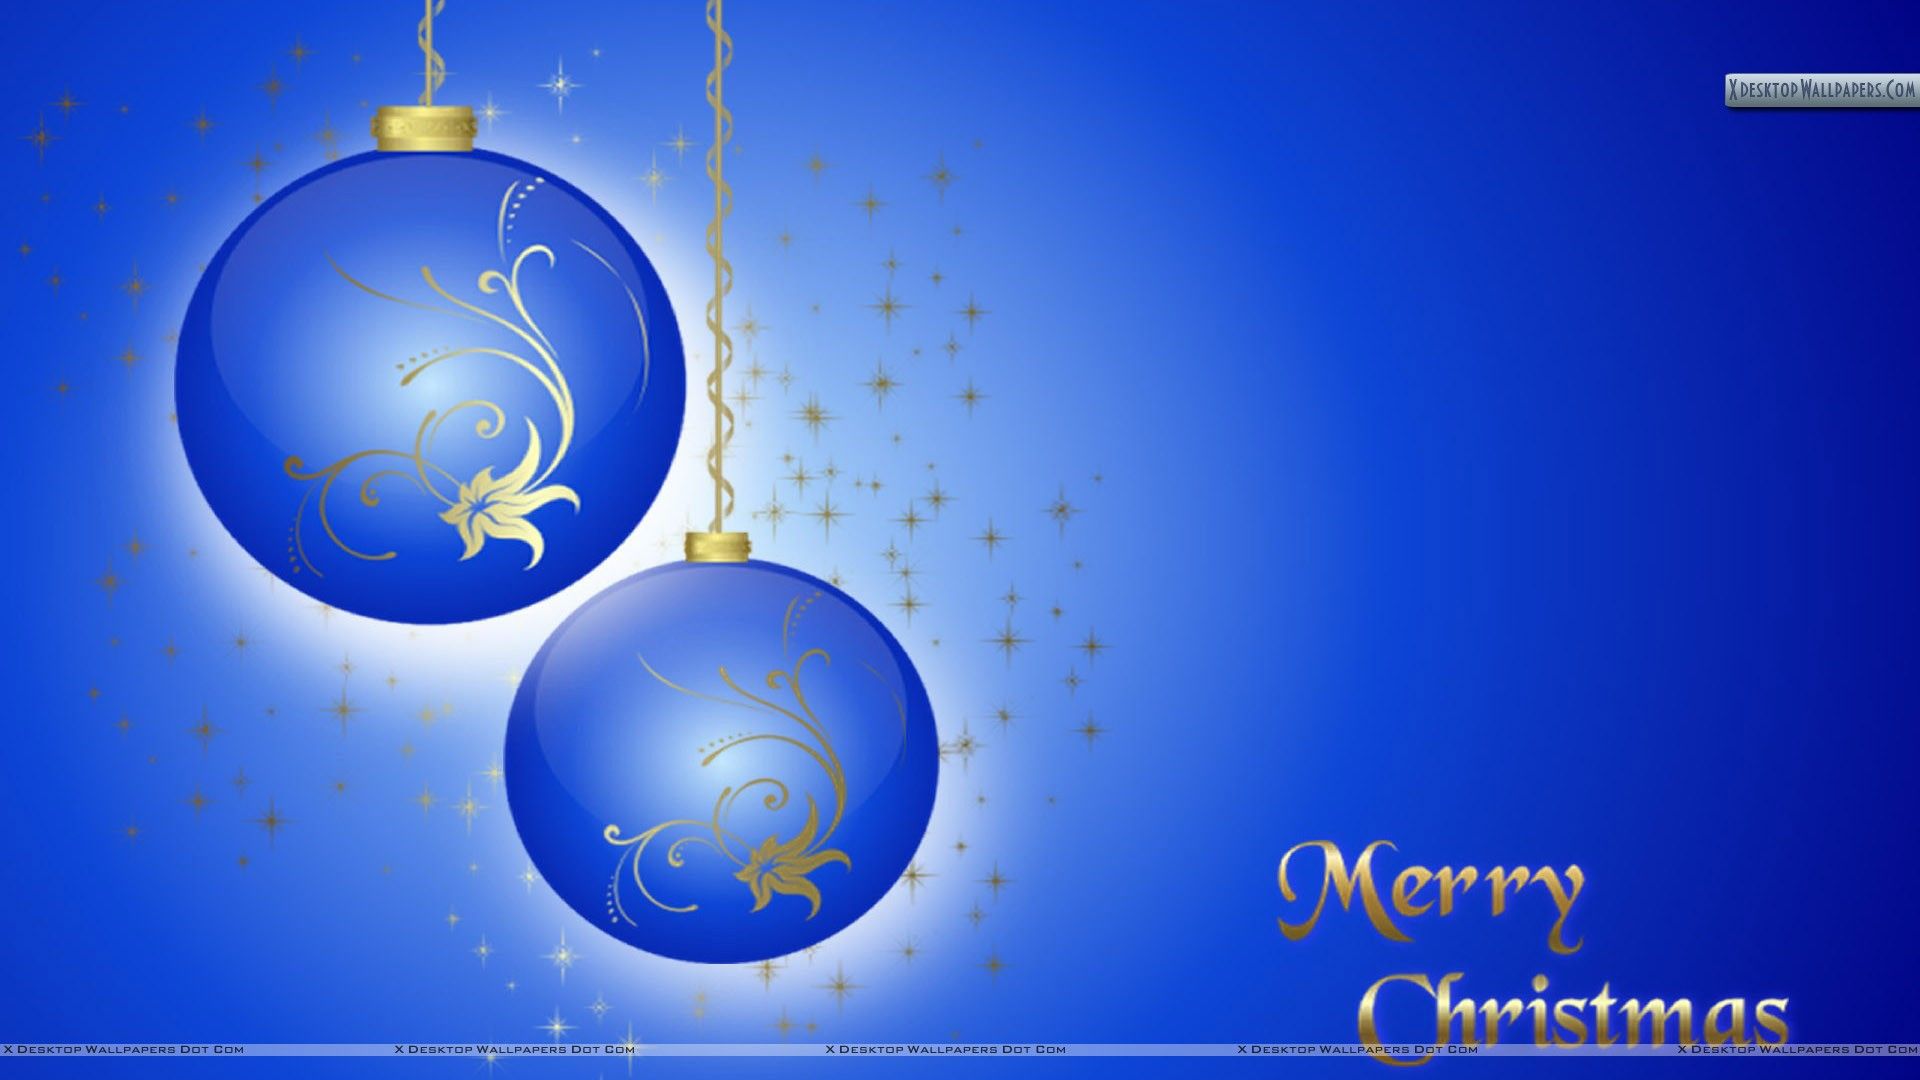 Merry Christmas Blue Baloons & Background Wallpaper